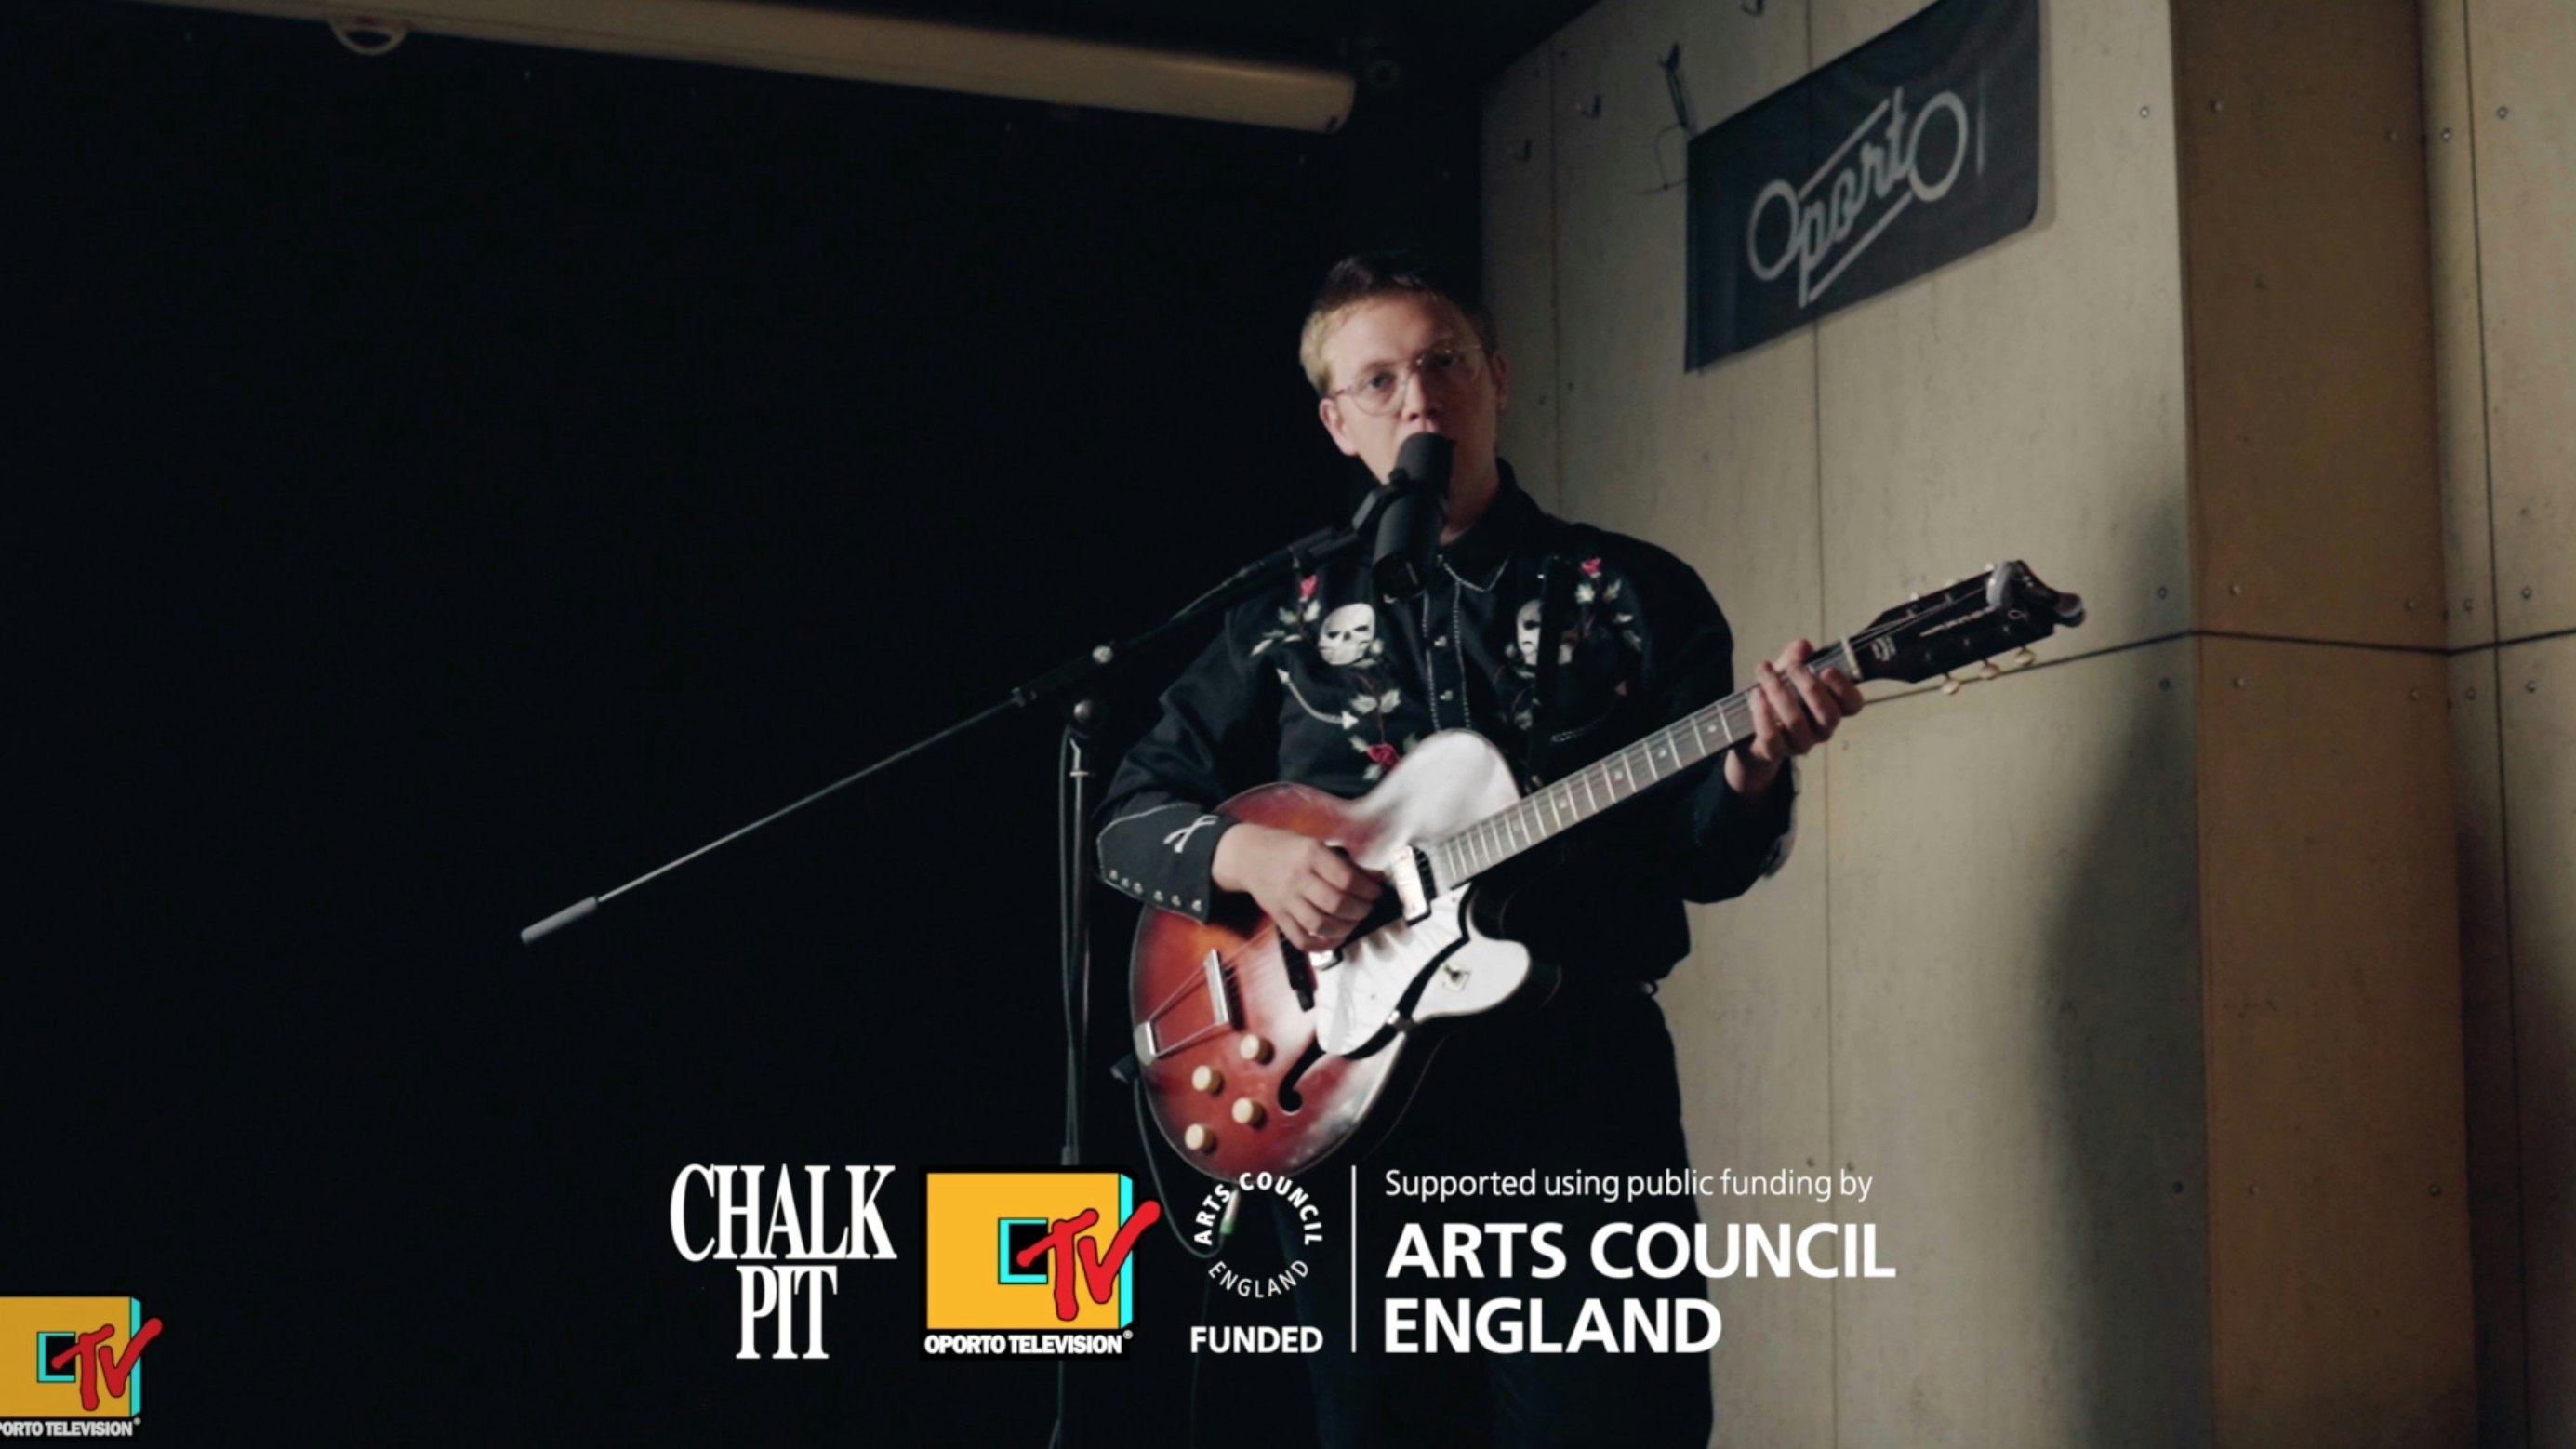 The Howl & The Hum (Sam Solo) session by Chalkpit Records on #OportoTV​​